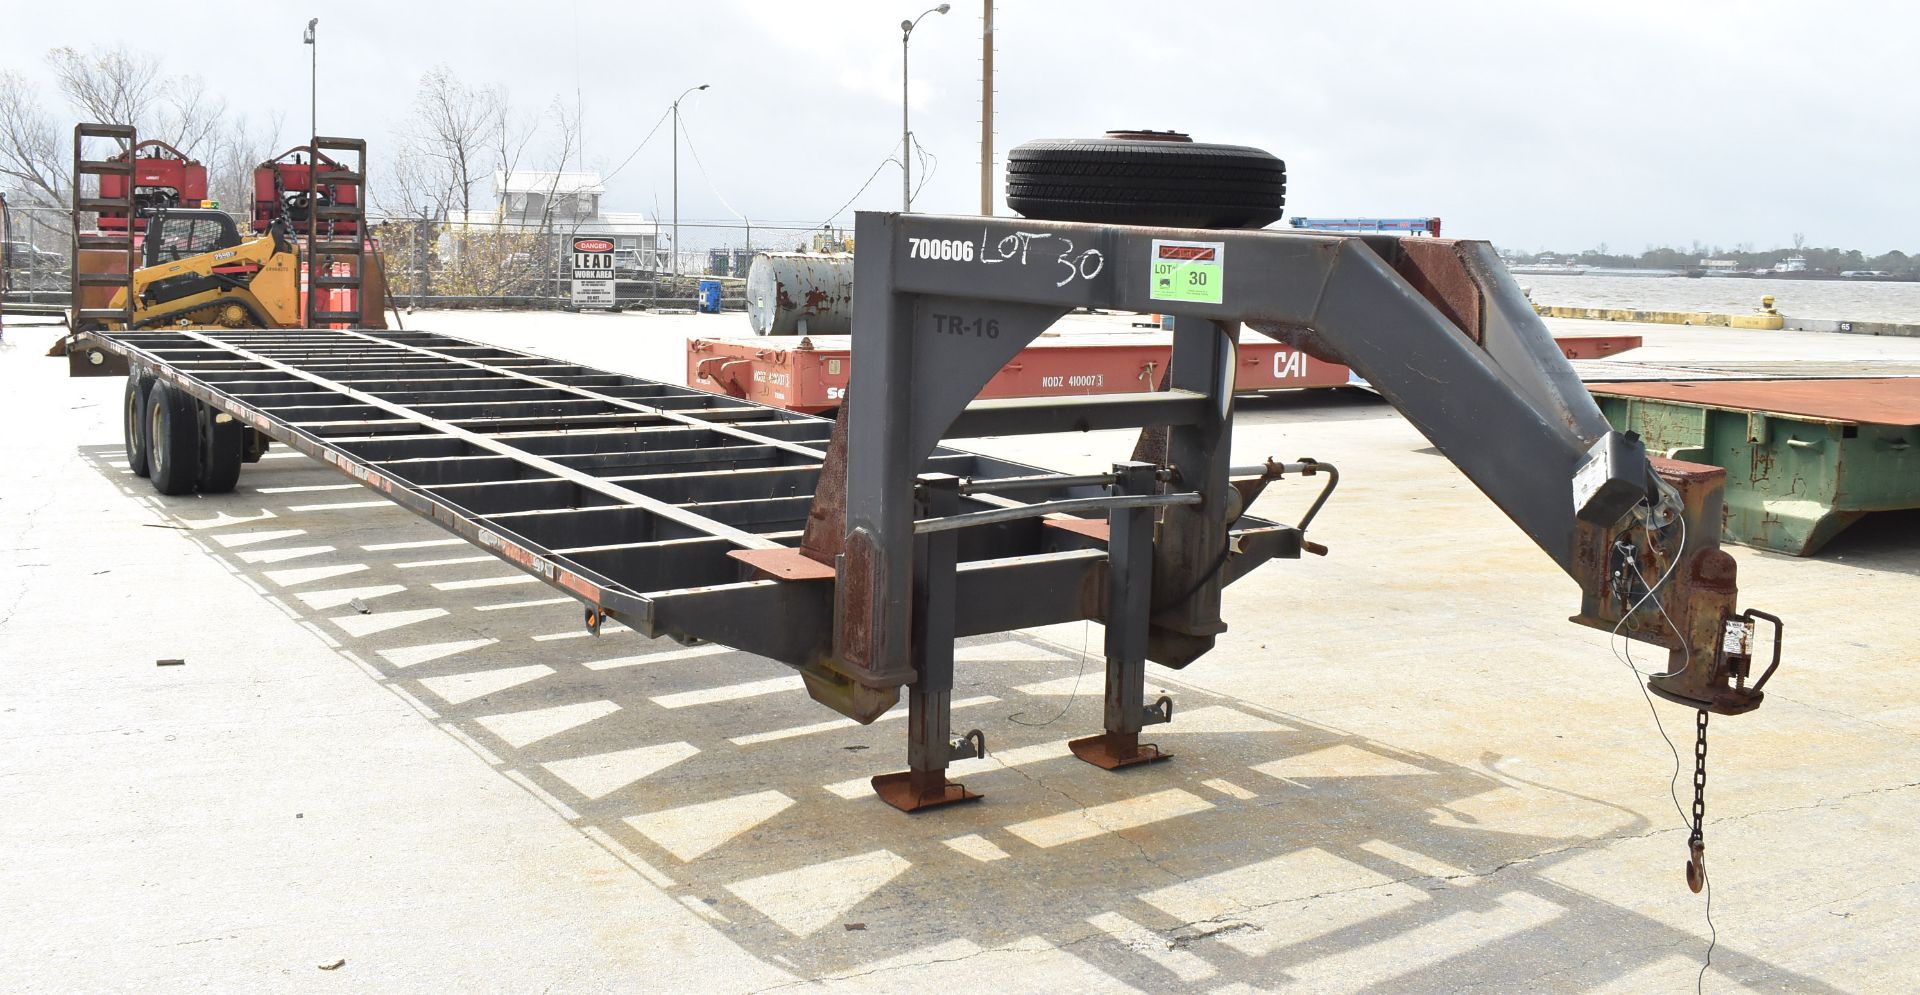 ABS WELDING APPROX. 20' TANDEM AXLE GOOSE NECK FLAT DECK TRAILER WITH 24,000 LB. GVWR CAPACITY, REAR